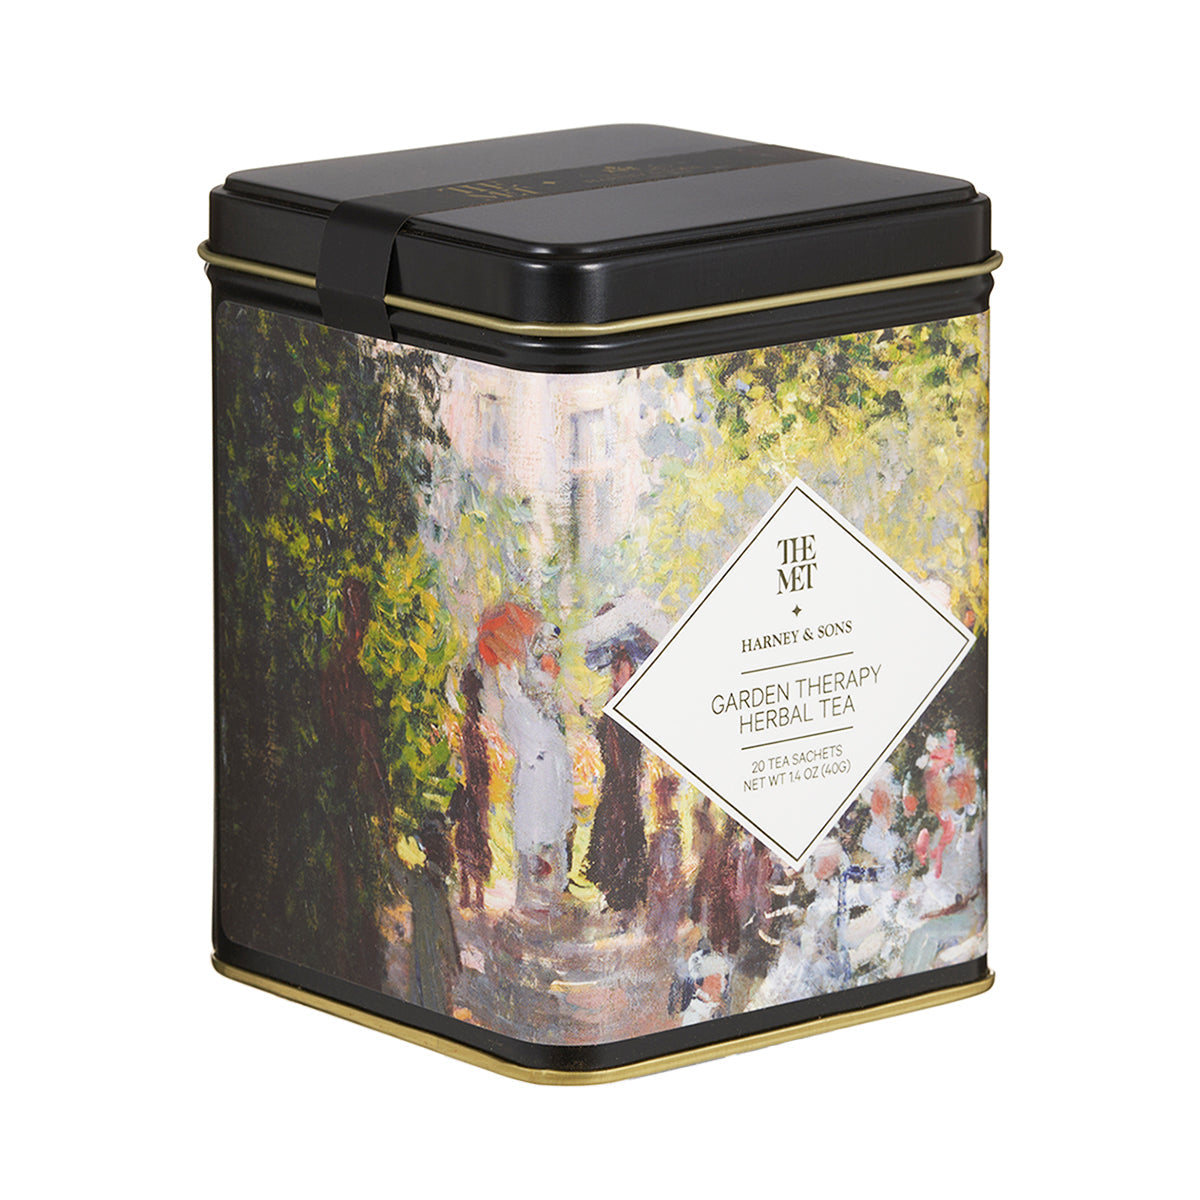 【HARNEY & SONS × THE MET】GARDEN THERAPY HERBAL TEA   ガーデン・セラピー・ハーバル・ティー 【HDS】